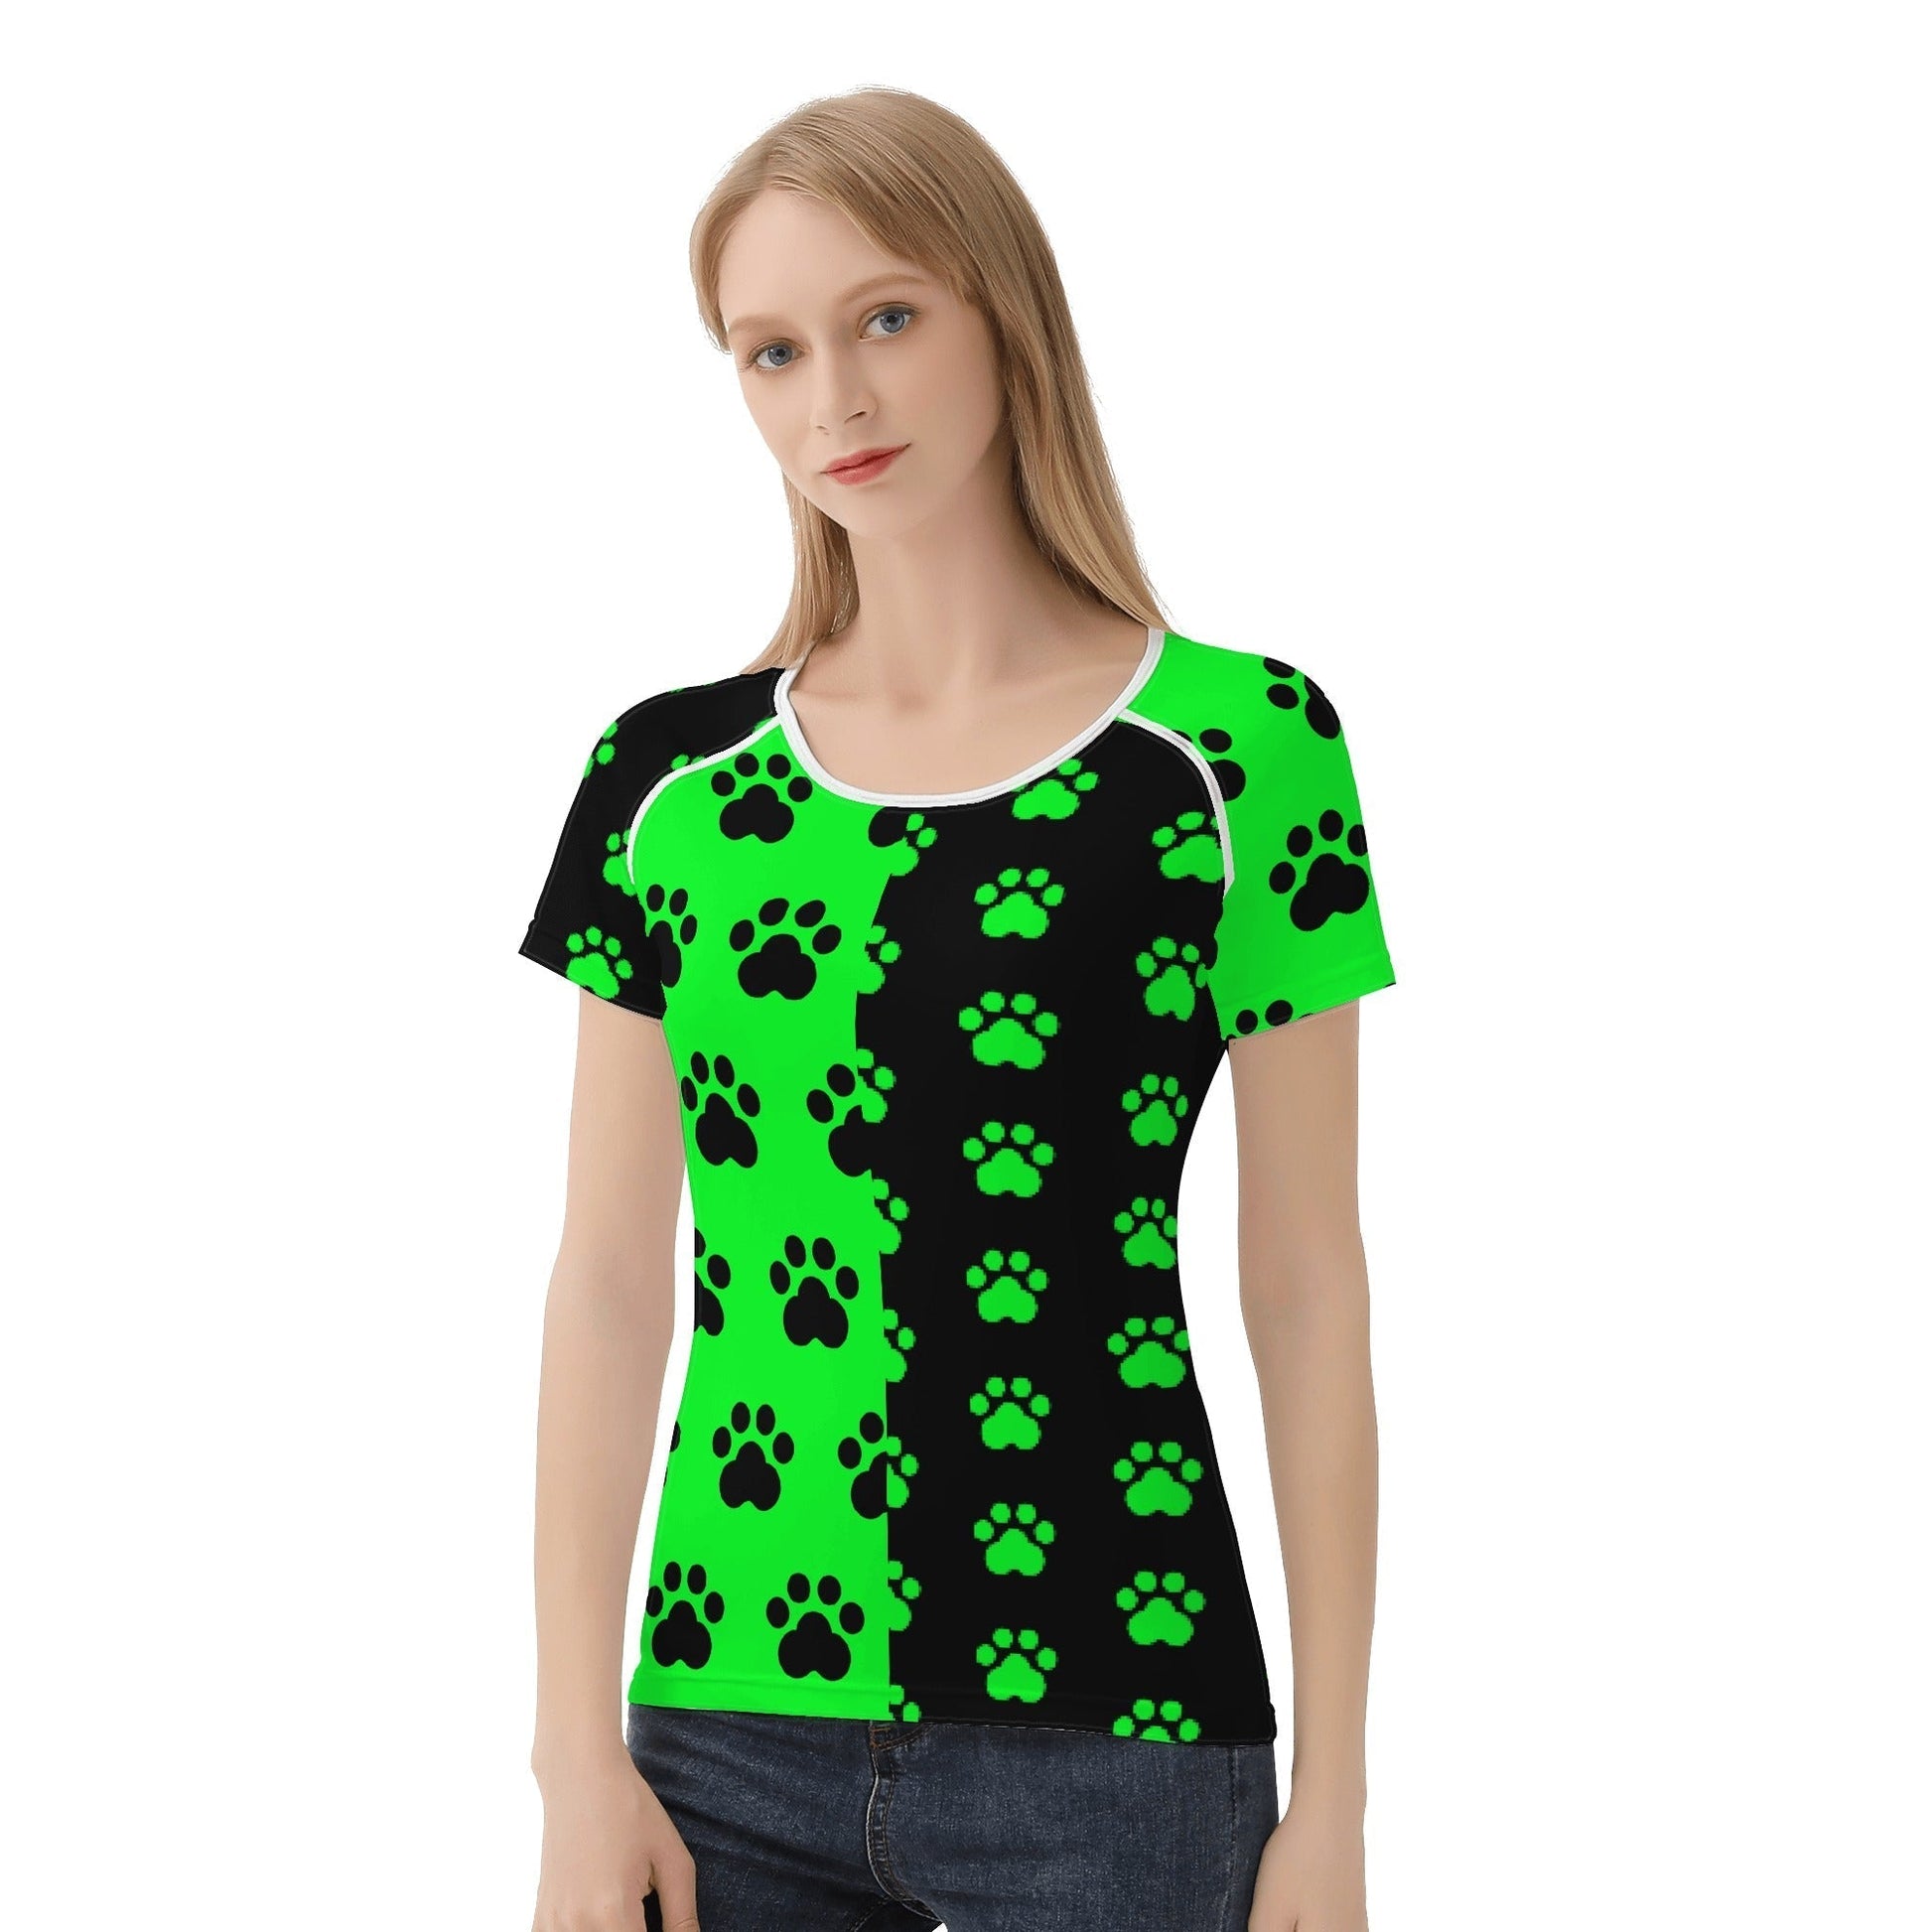 Stand out  with the  2 Tone Womens T shirt  available at Hey Nugget. Grab yours today!